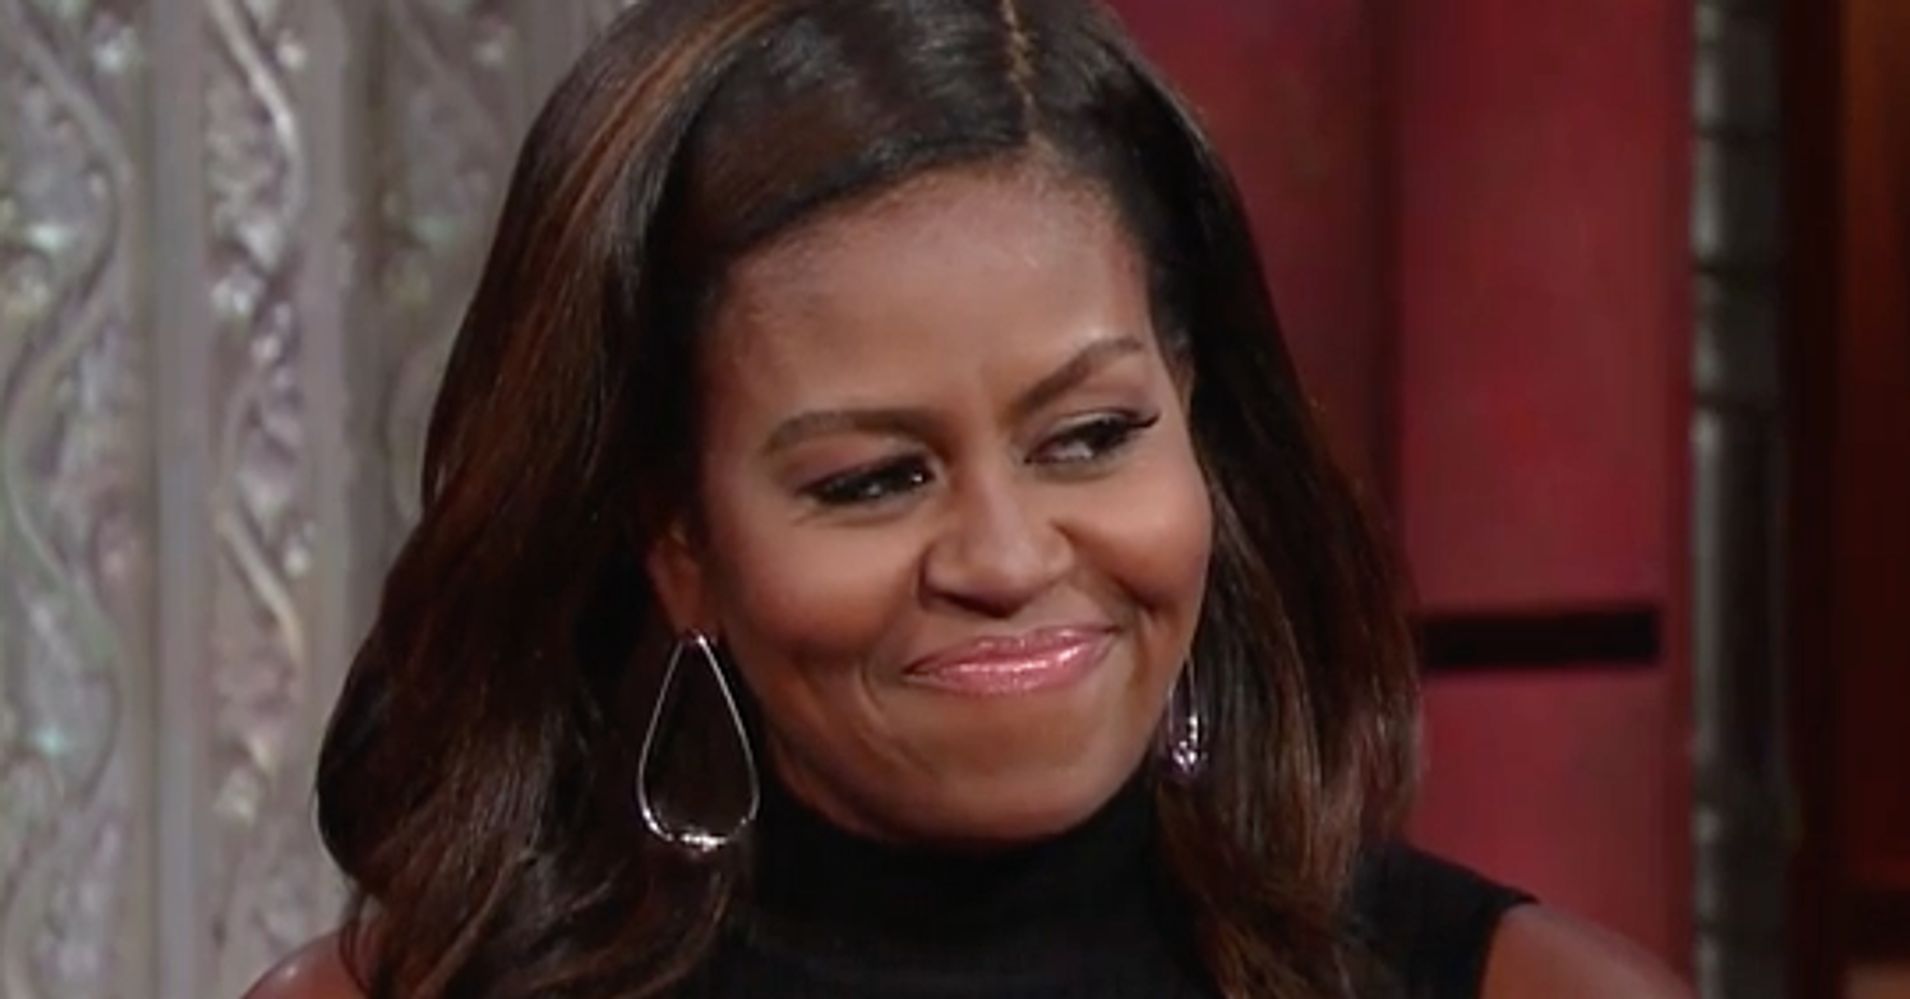 Michelle Obama’s Reaction To Melania Trump Plagiarizing Her Speech Is Priceless ...